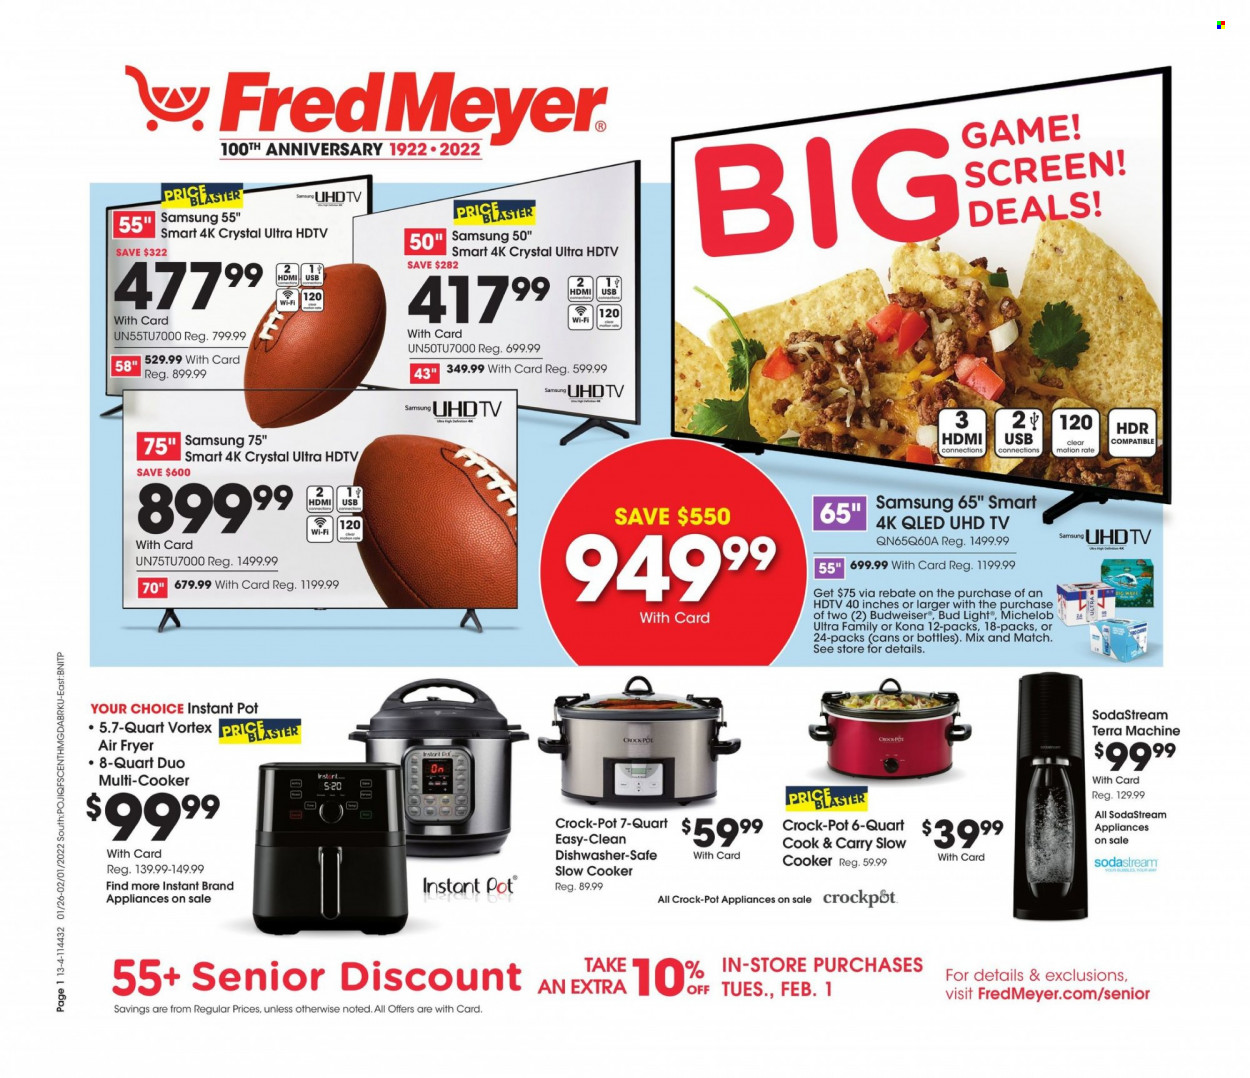 thumbnail - Fred Meyer Flyer - 01/26/2022 - 02/01/2022 - Sales products - rice, beer, Bud Light, pot, SodaStream, Samsung, UHD TV, HDTV, TV, multifunction cooker, slow cooker, air fryer, Instant Pot, CrockPot, Budweiser, Michelob. Page 1.